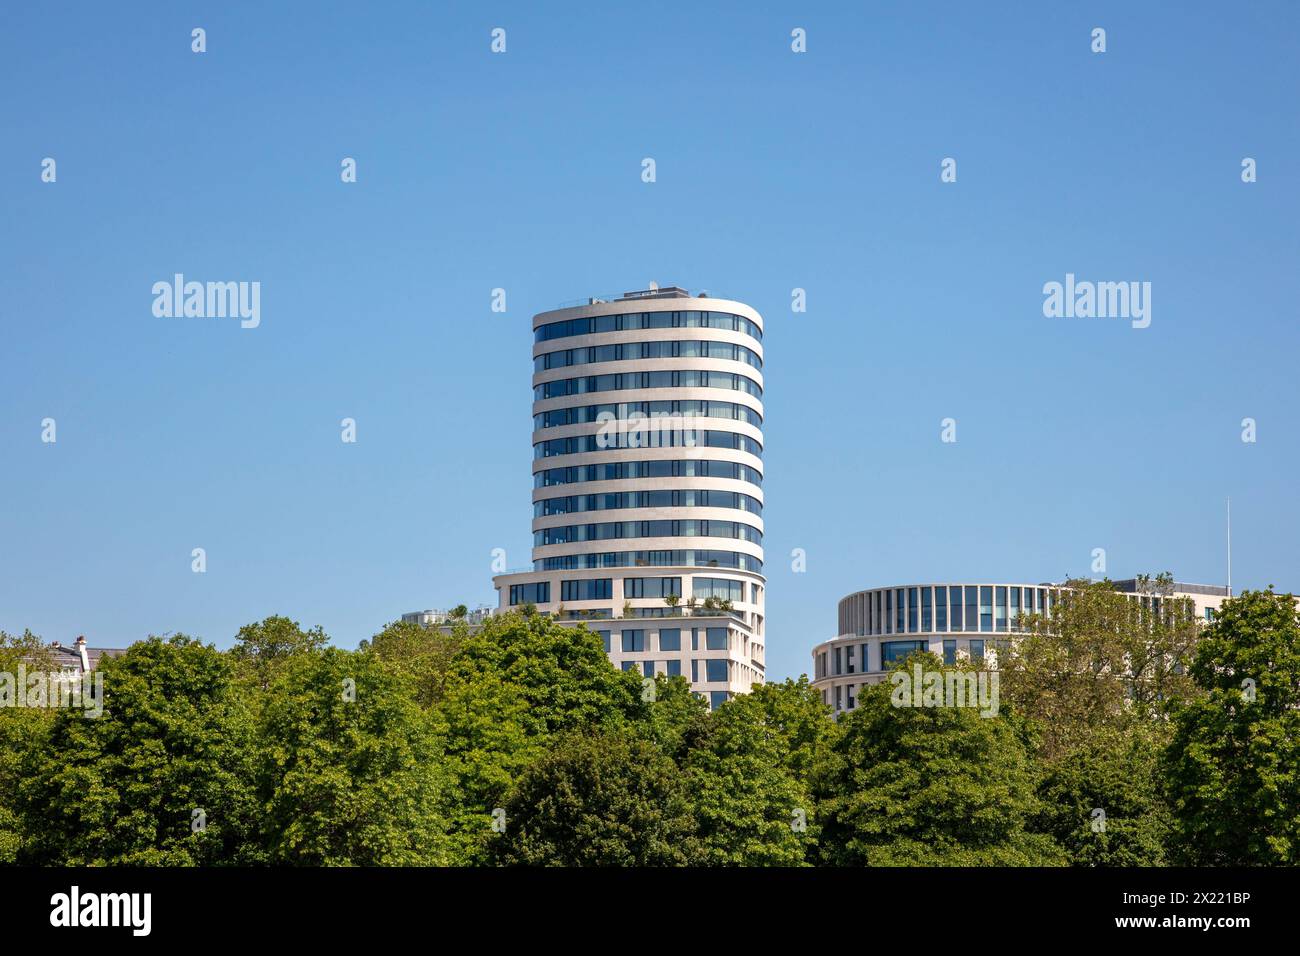 Exterior view of The Bryanston from Hyde Park. The Bryanston - Hyde Park, London, United Kingdom. Architect: Rafael Viñoly, 2023. Stock Photo